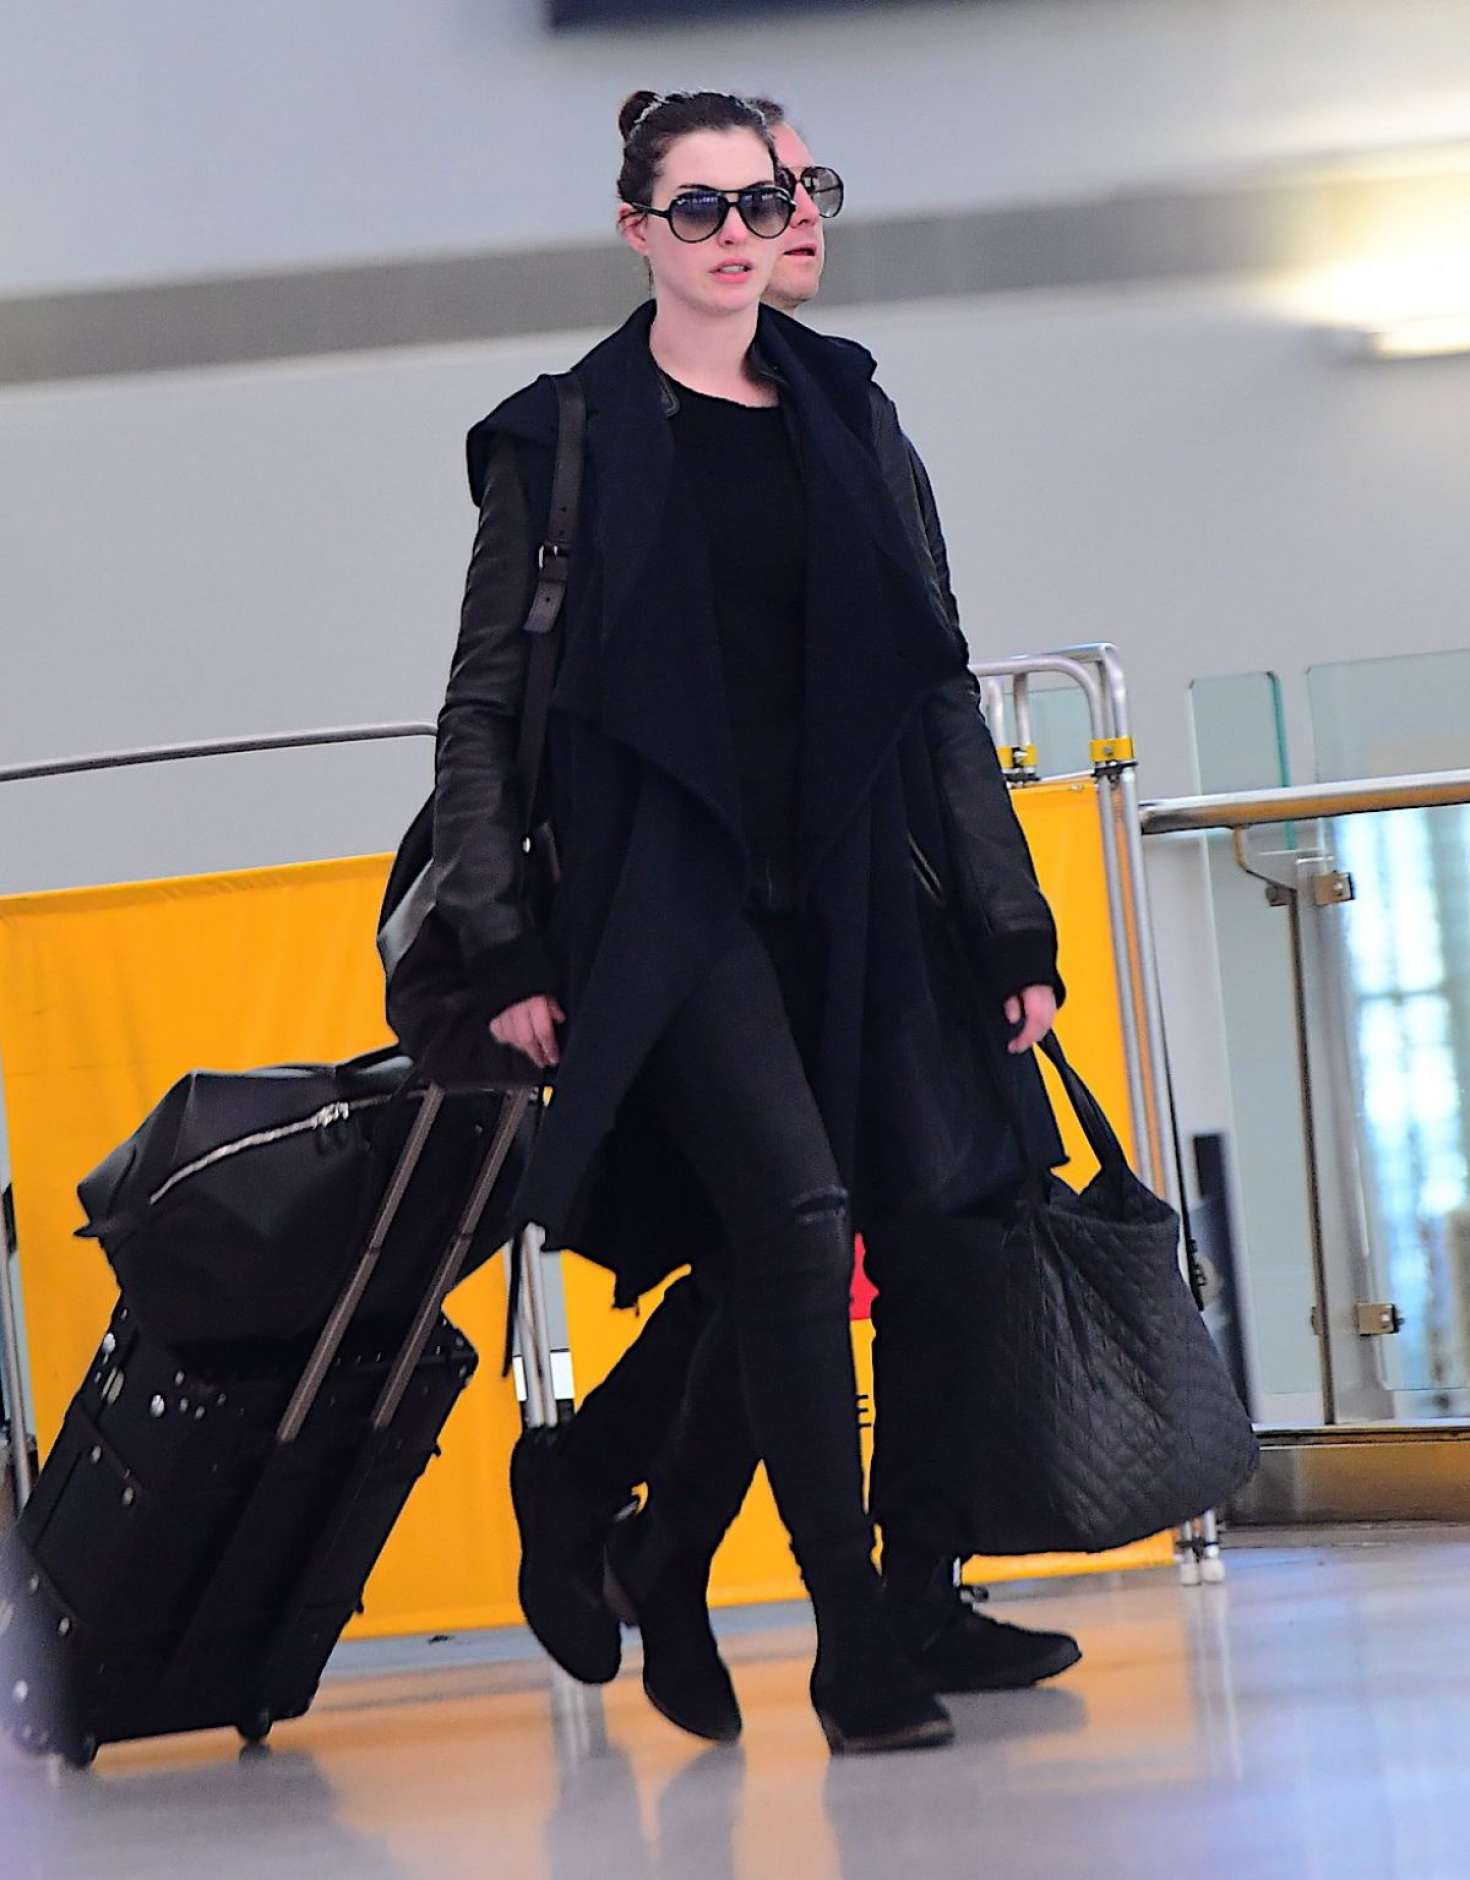 Anne Hathaway - Arrive at JFK Airport in New York